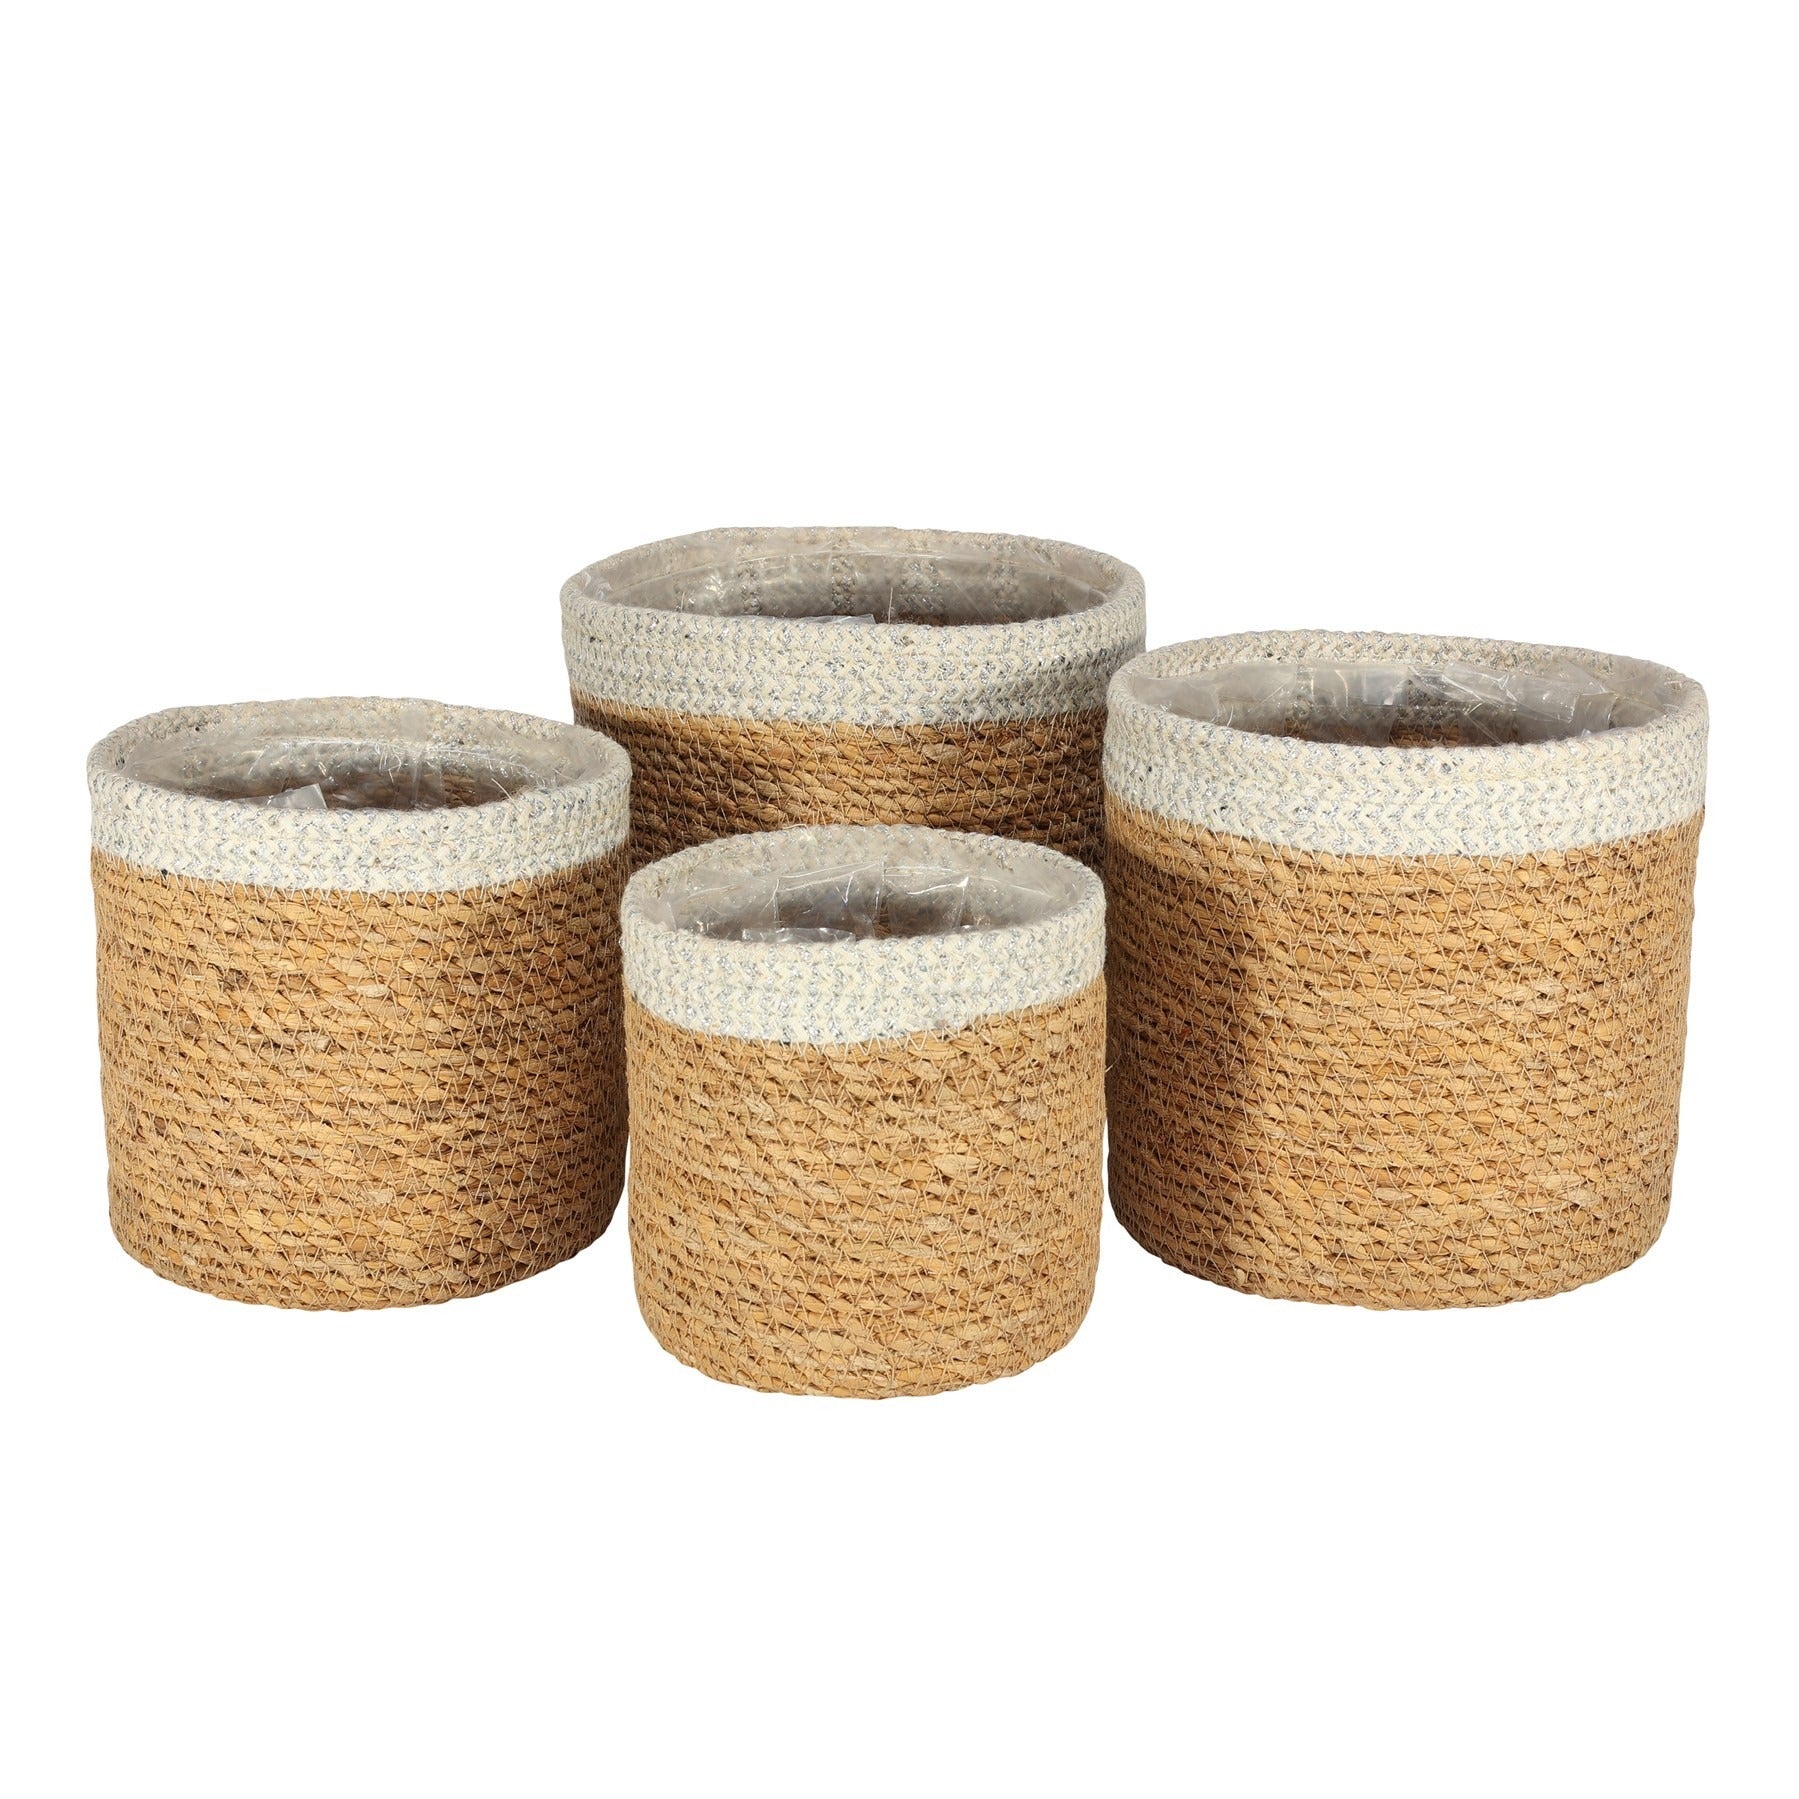 View Set of 4 Hogla Baskets with Liner Natural Silver information